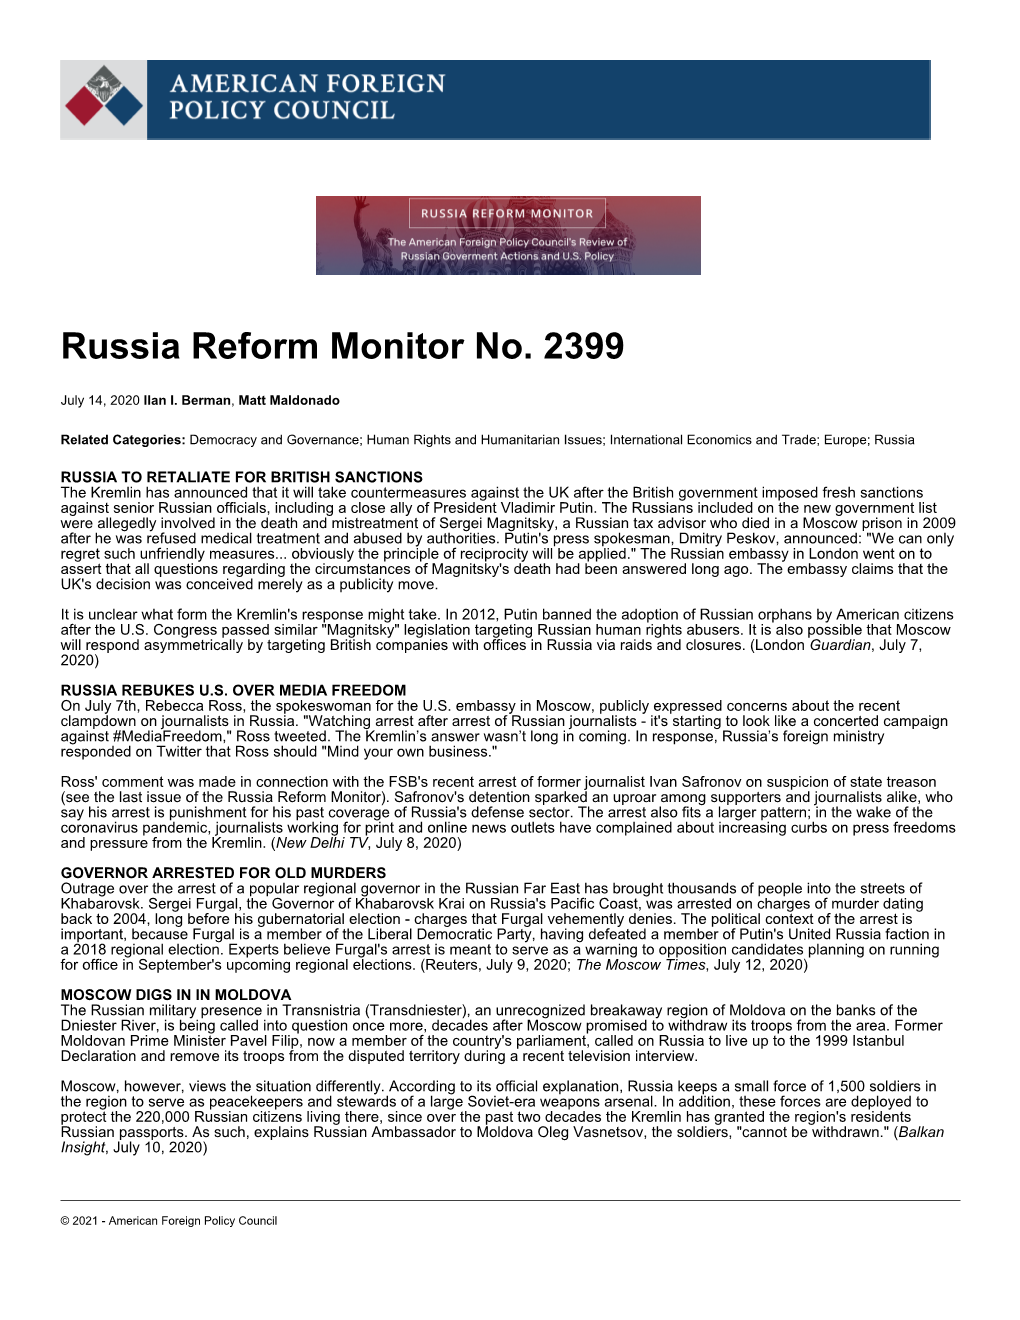 Russia Reform Monitor No. 2399 | American Foreign Policy Council